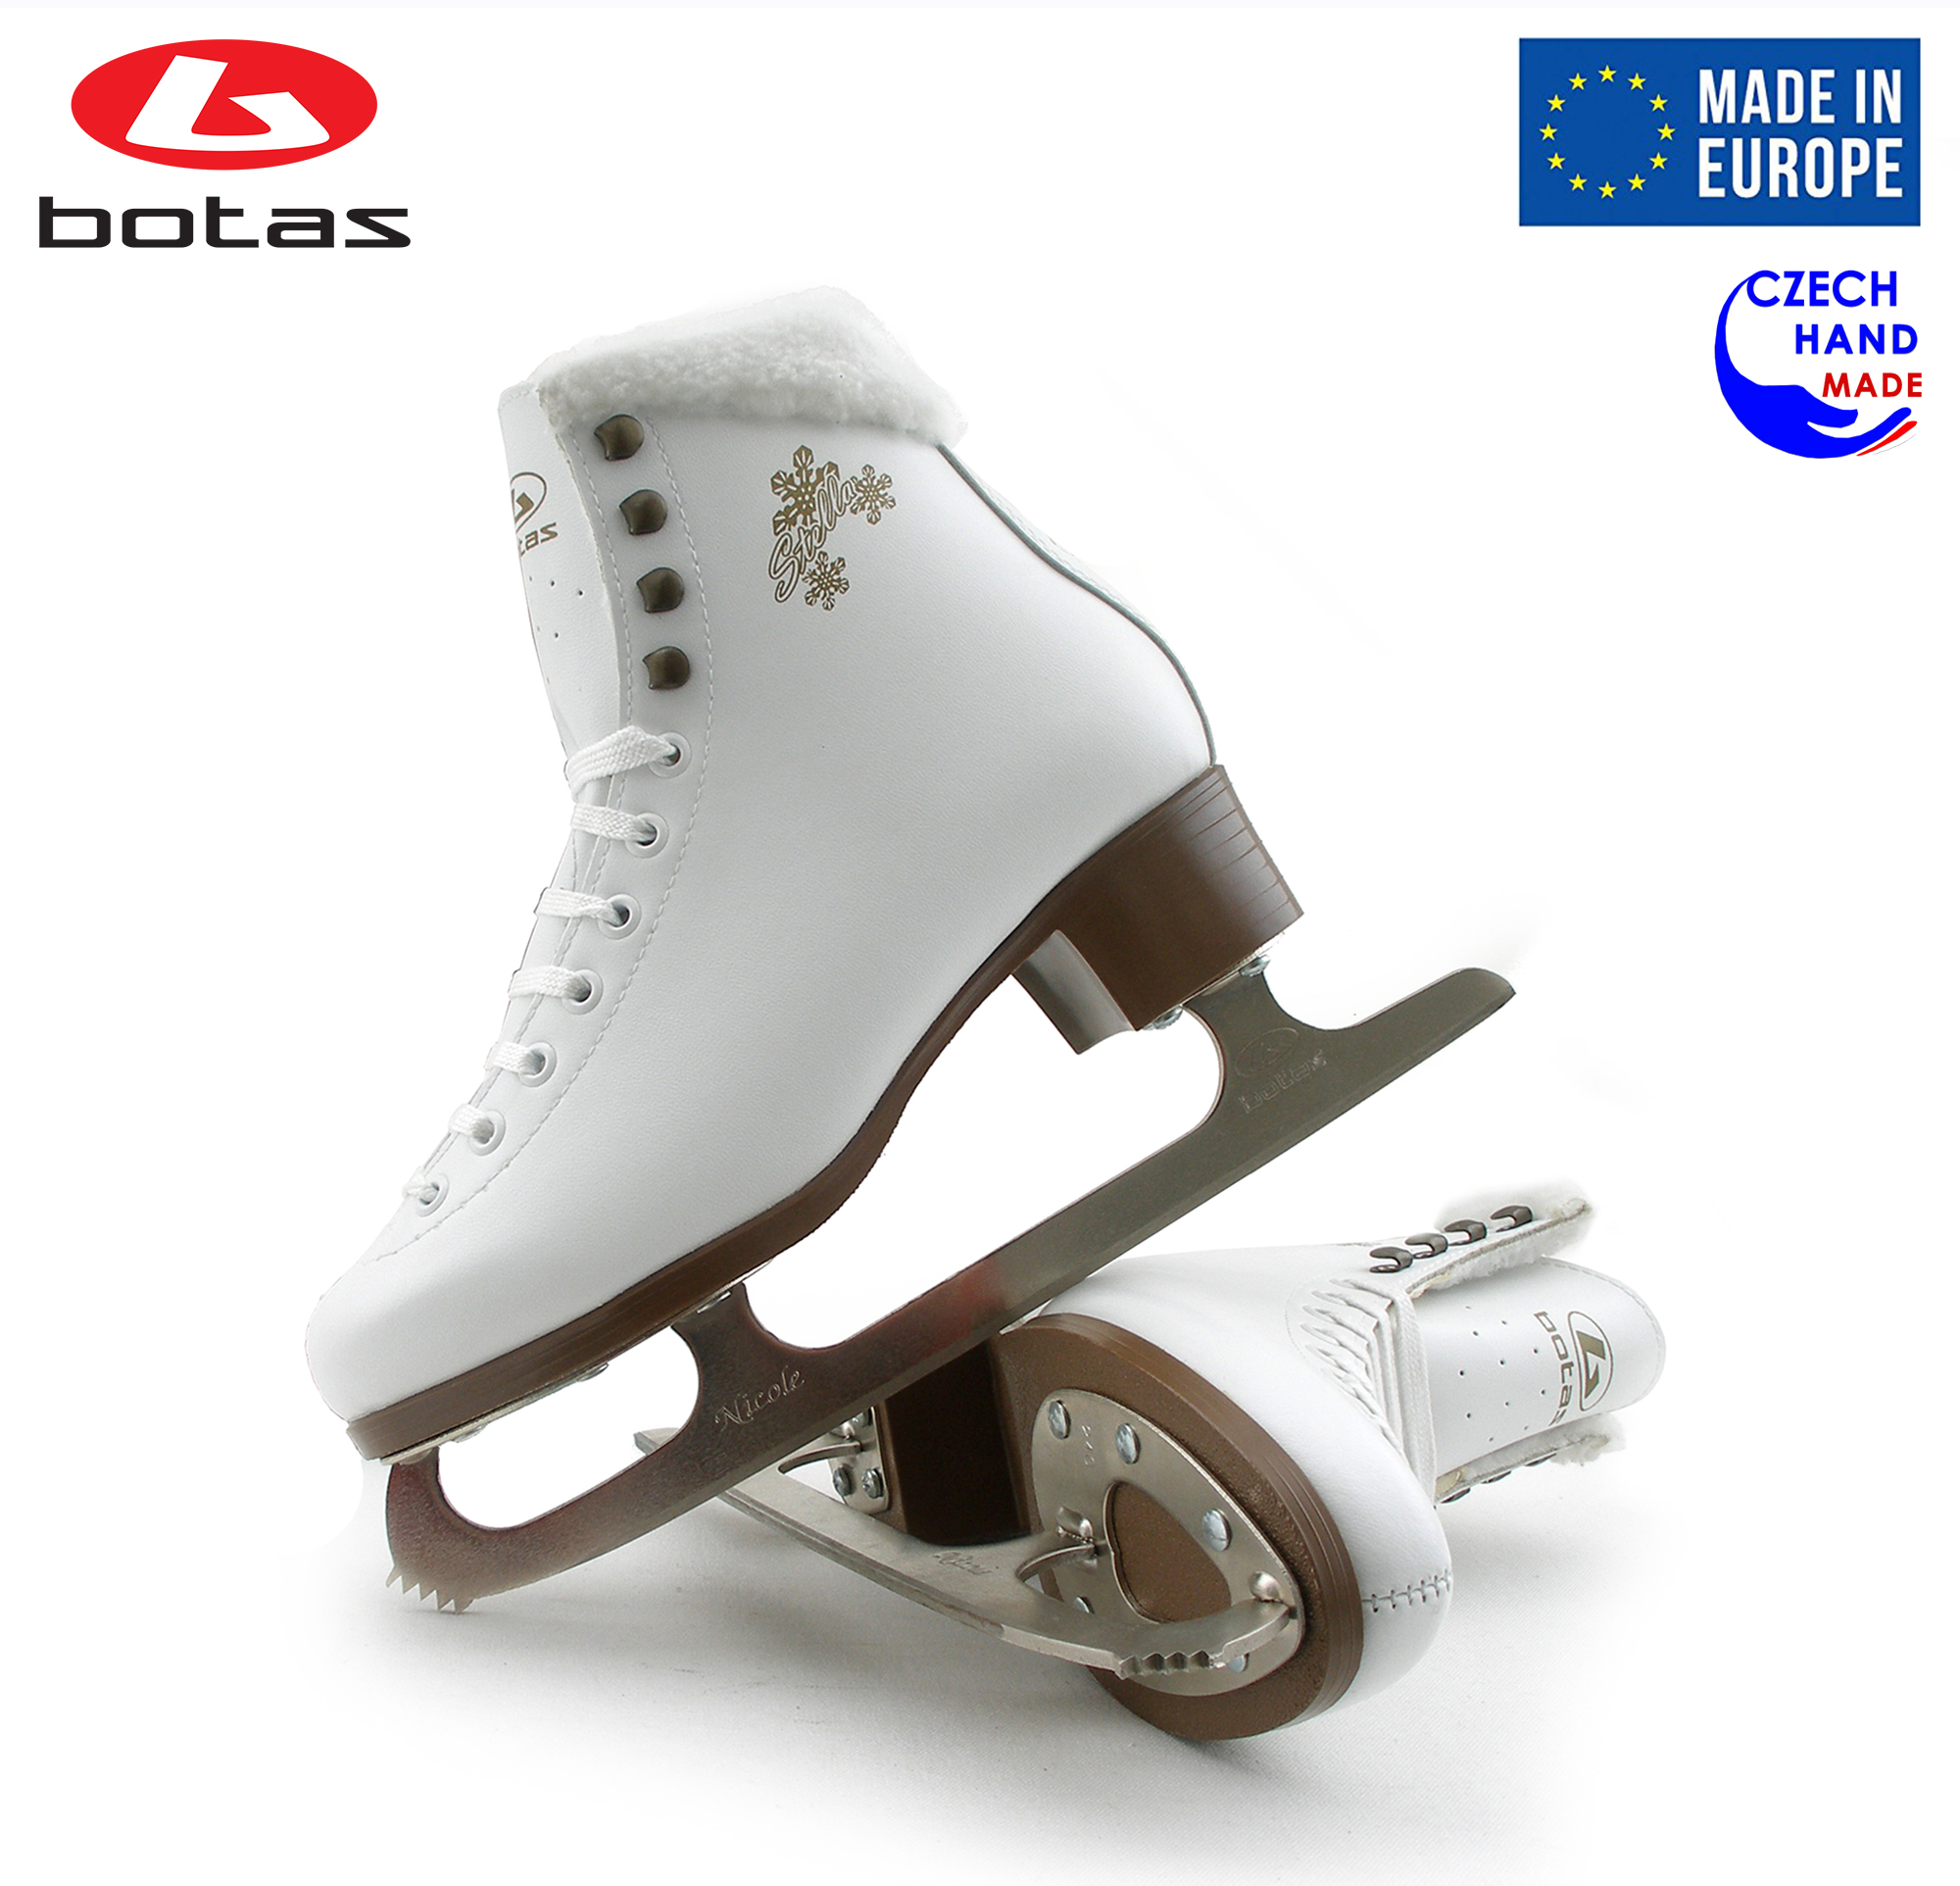 BOTAS - model: STELLA / Made in Europe (Czech Republic) / Innovated Elegant Figure Ice Skates for Girls, Kids / with Plush Collar / NICOLE blades / Color: White, Size: Kids 11 - image 3 of 6